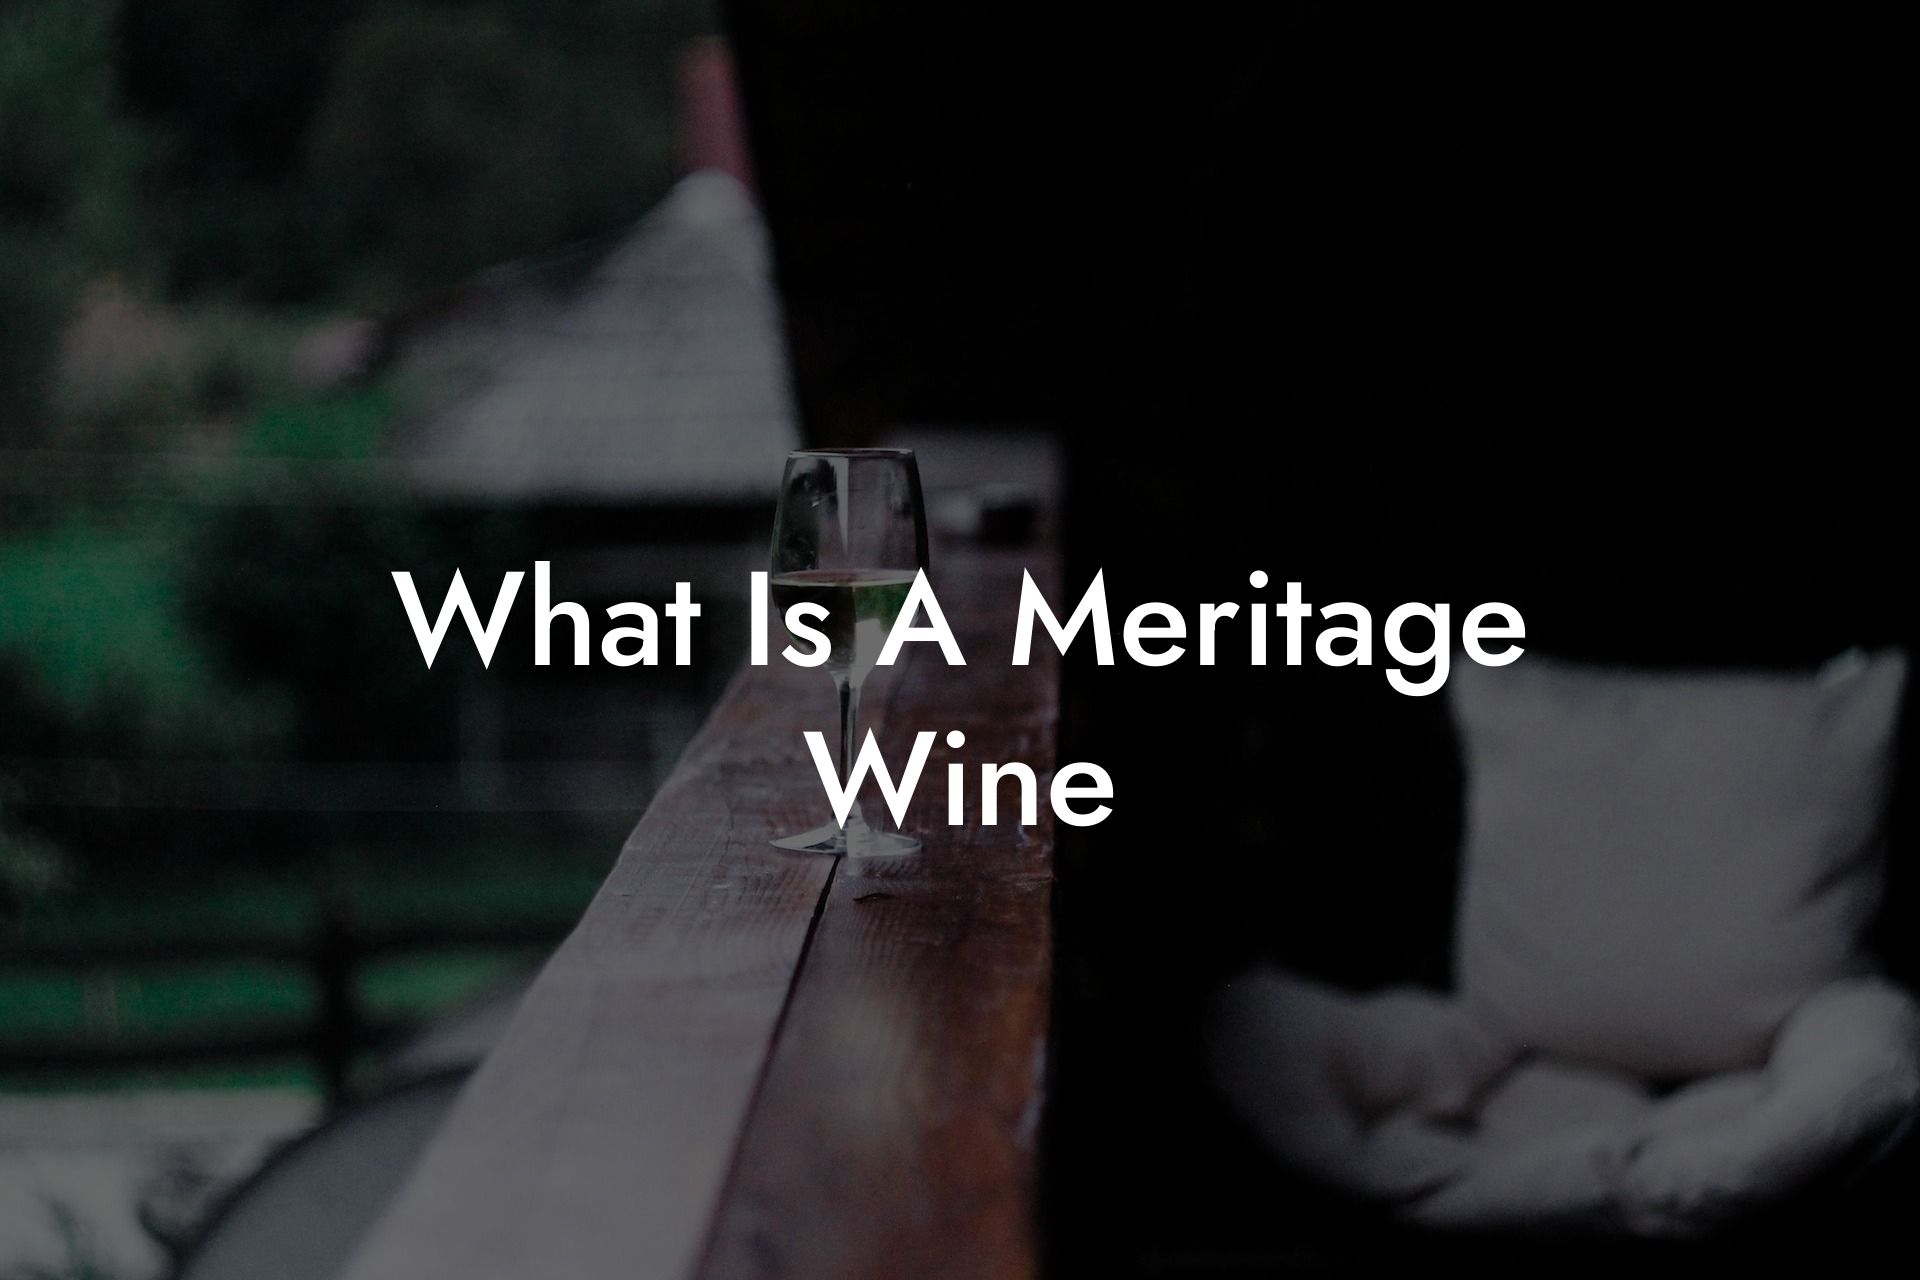 What Is A Meritage Wine